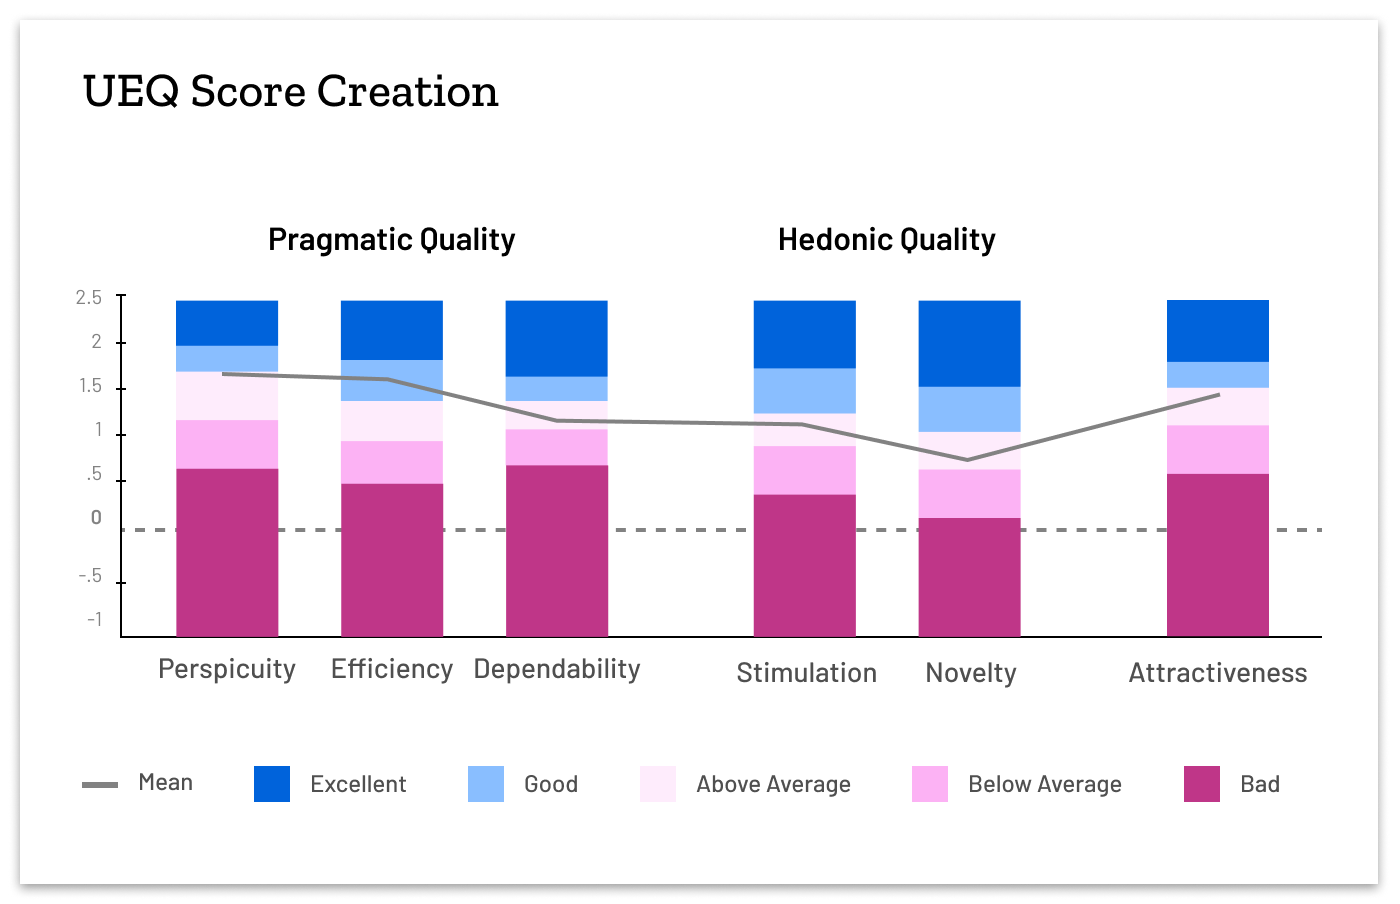 A bar chart of the 6 categories that make the UEQ. 3 categories make up the Pragmatic quality: perspicuity, efficiency and dependability. 2 categories make up the Hedonic quality: stimulation and novelty. The final category shown is attractiveness.